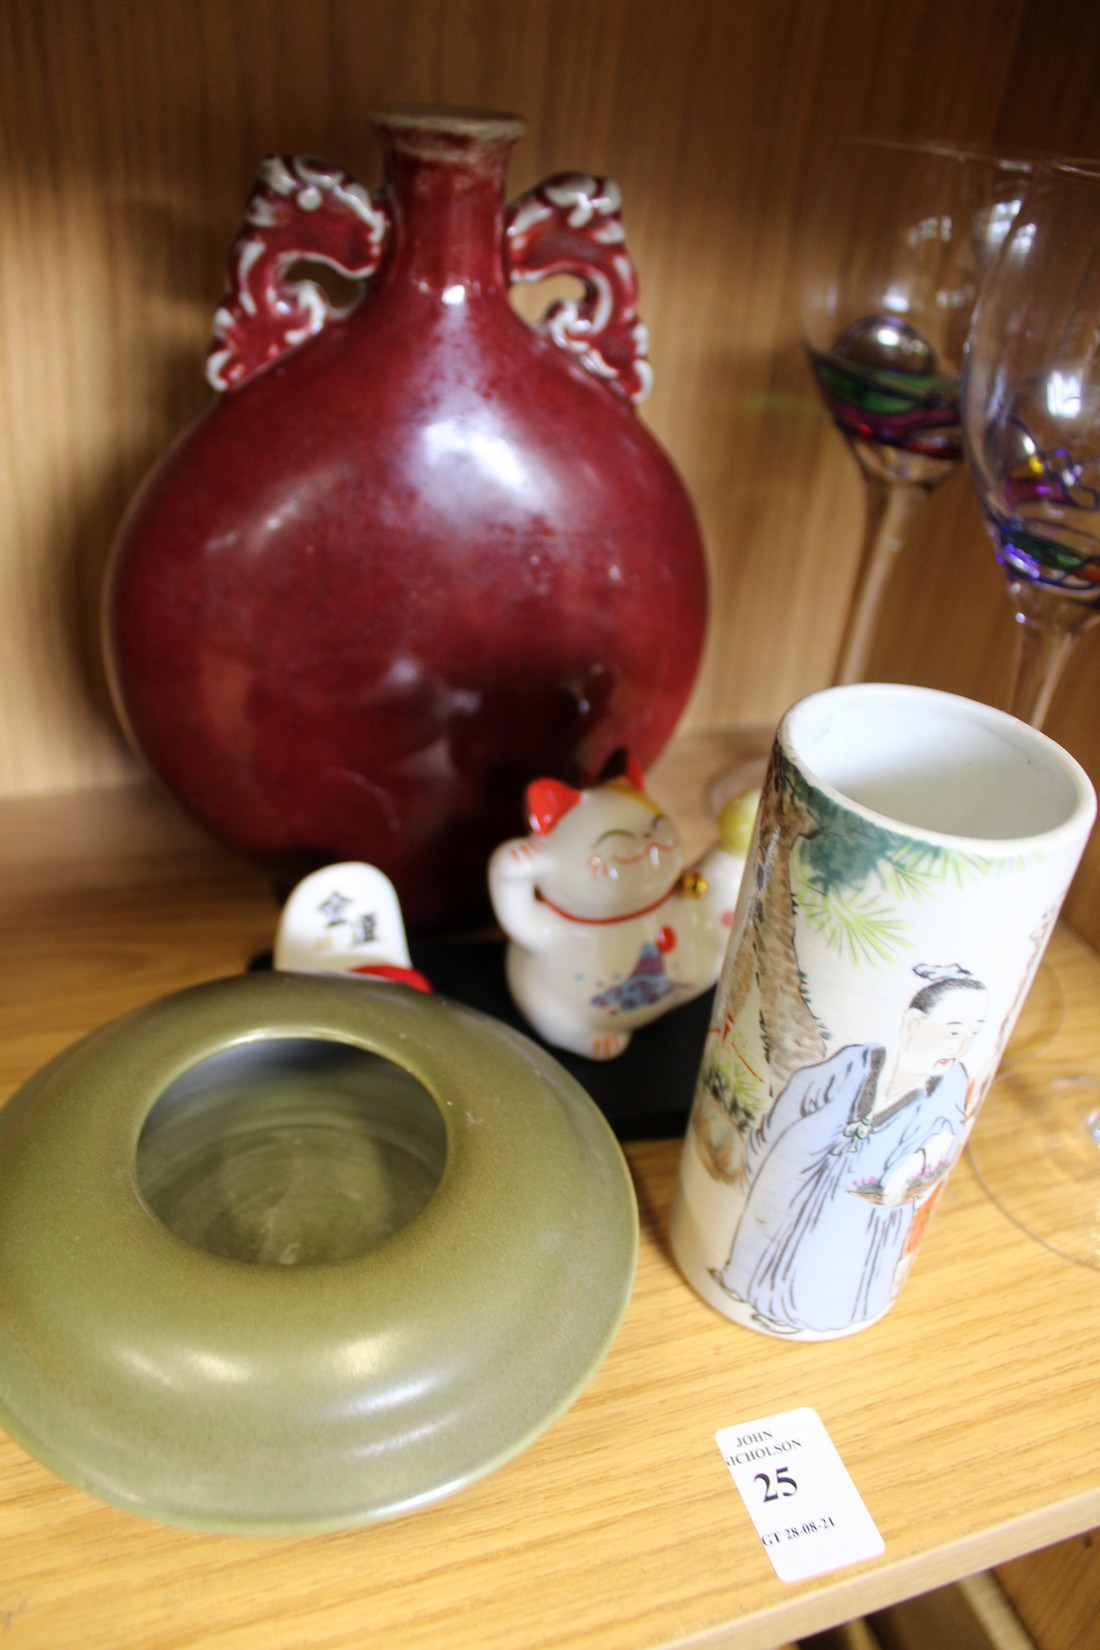 Chinese ceramics and decorative drinking glasses. - Image 3 of 3